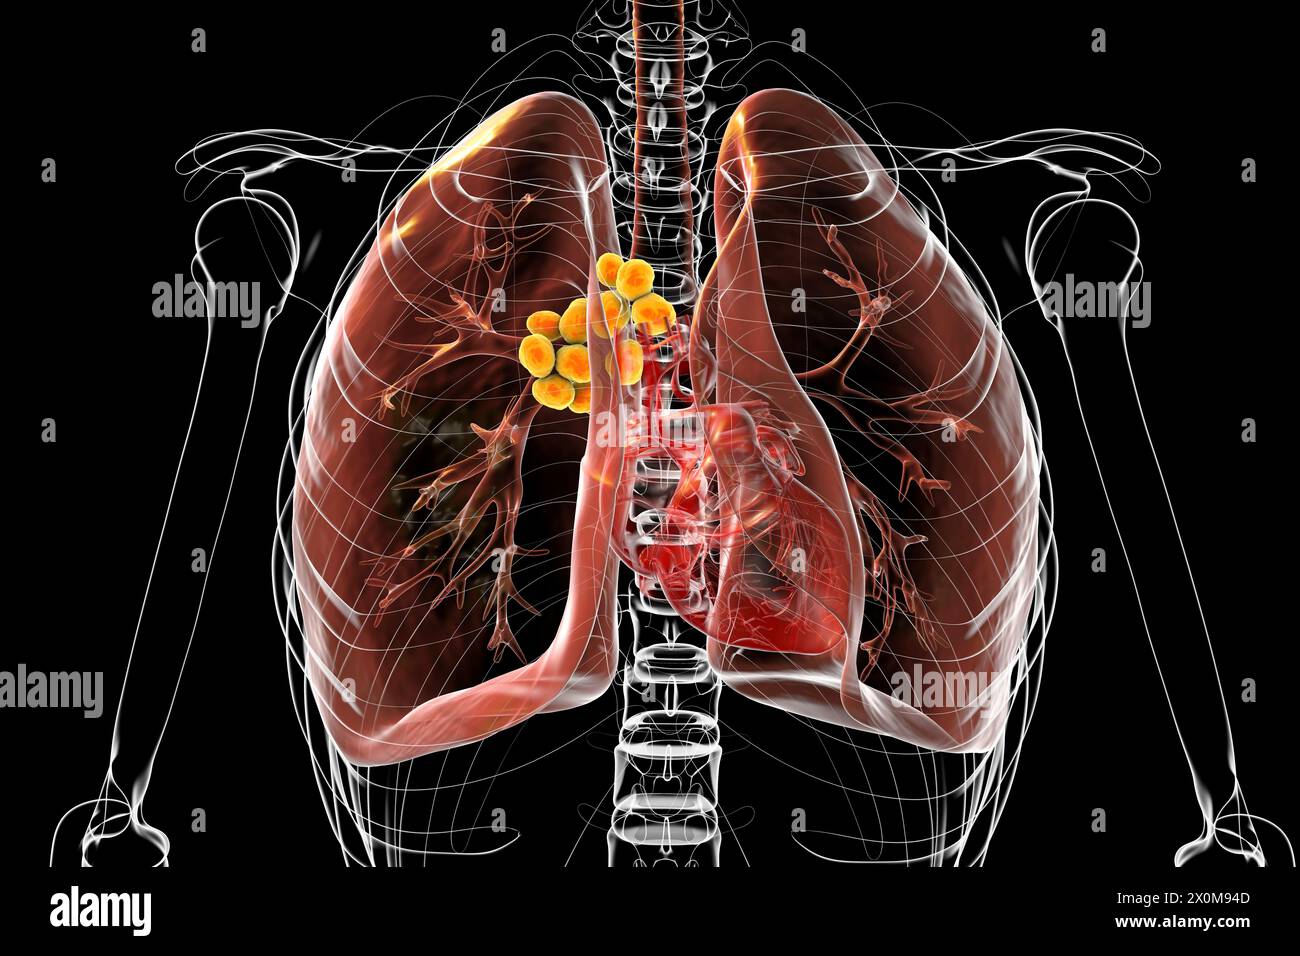 3D illustration of lungs affected by mediastinal lymphadenopathy . This is an enlargement of the lymph nodes found within the central thoracic (chest) cavity. There are multiple potential causes of mediastinal lymphadenopathy, including bacterial infection, cancer and genetic disease. Stock Photo